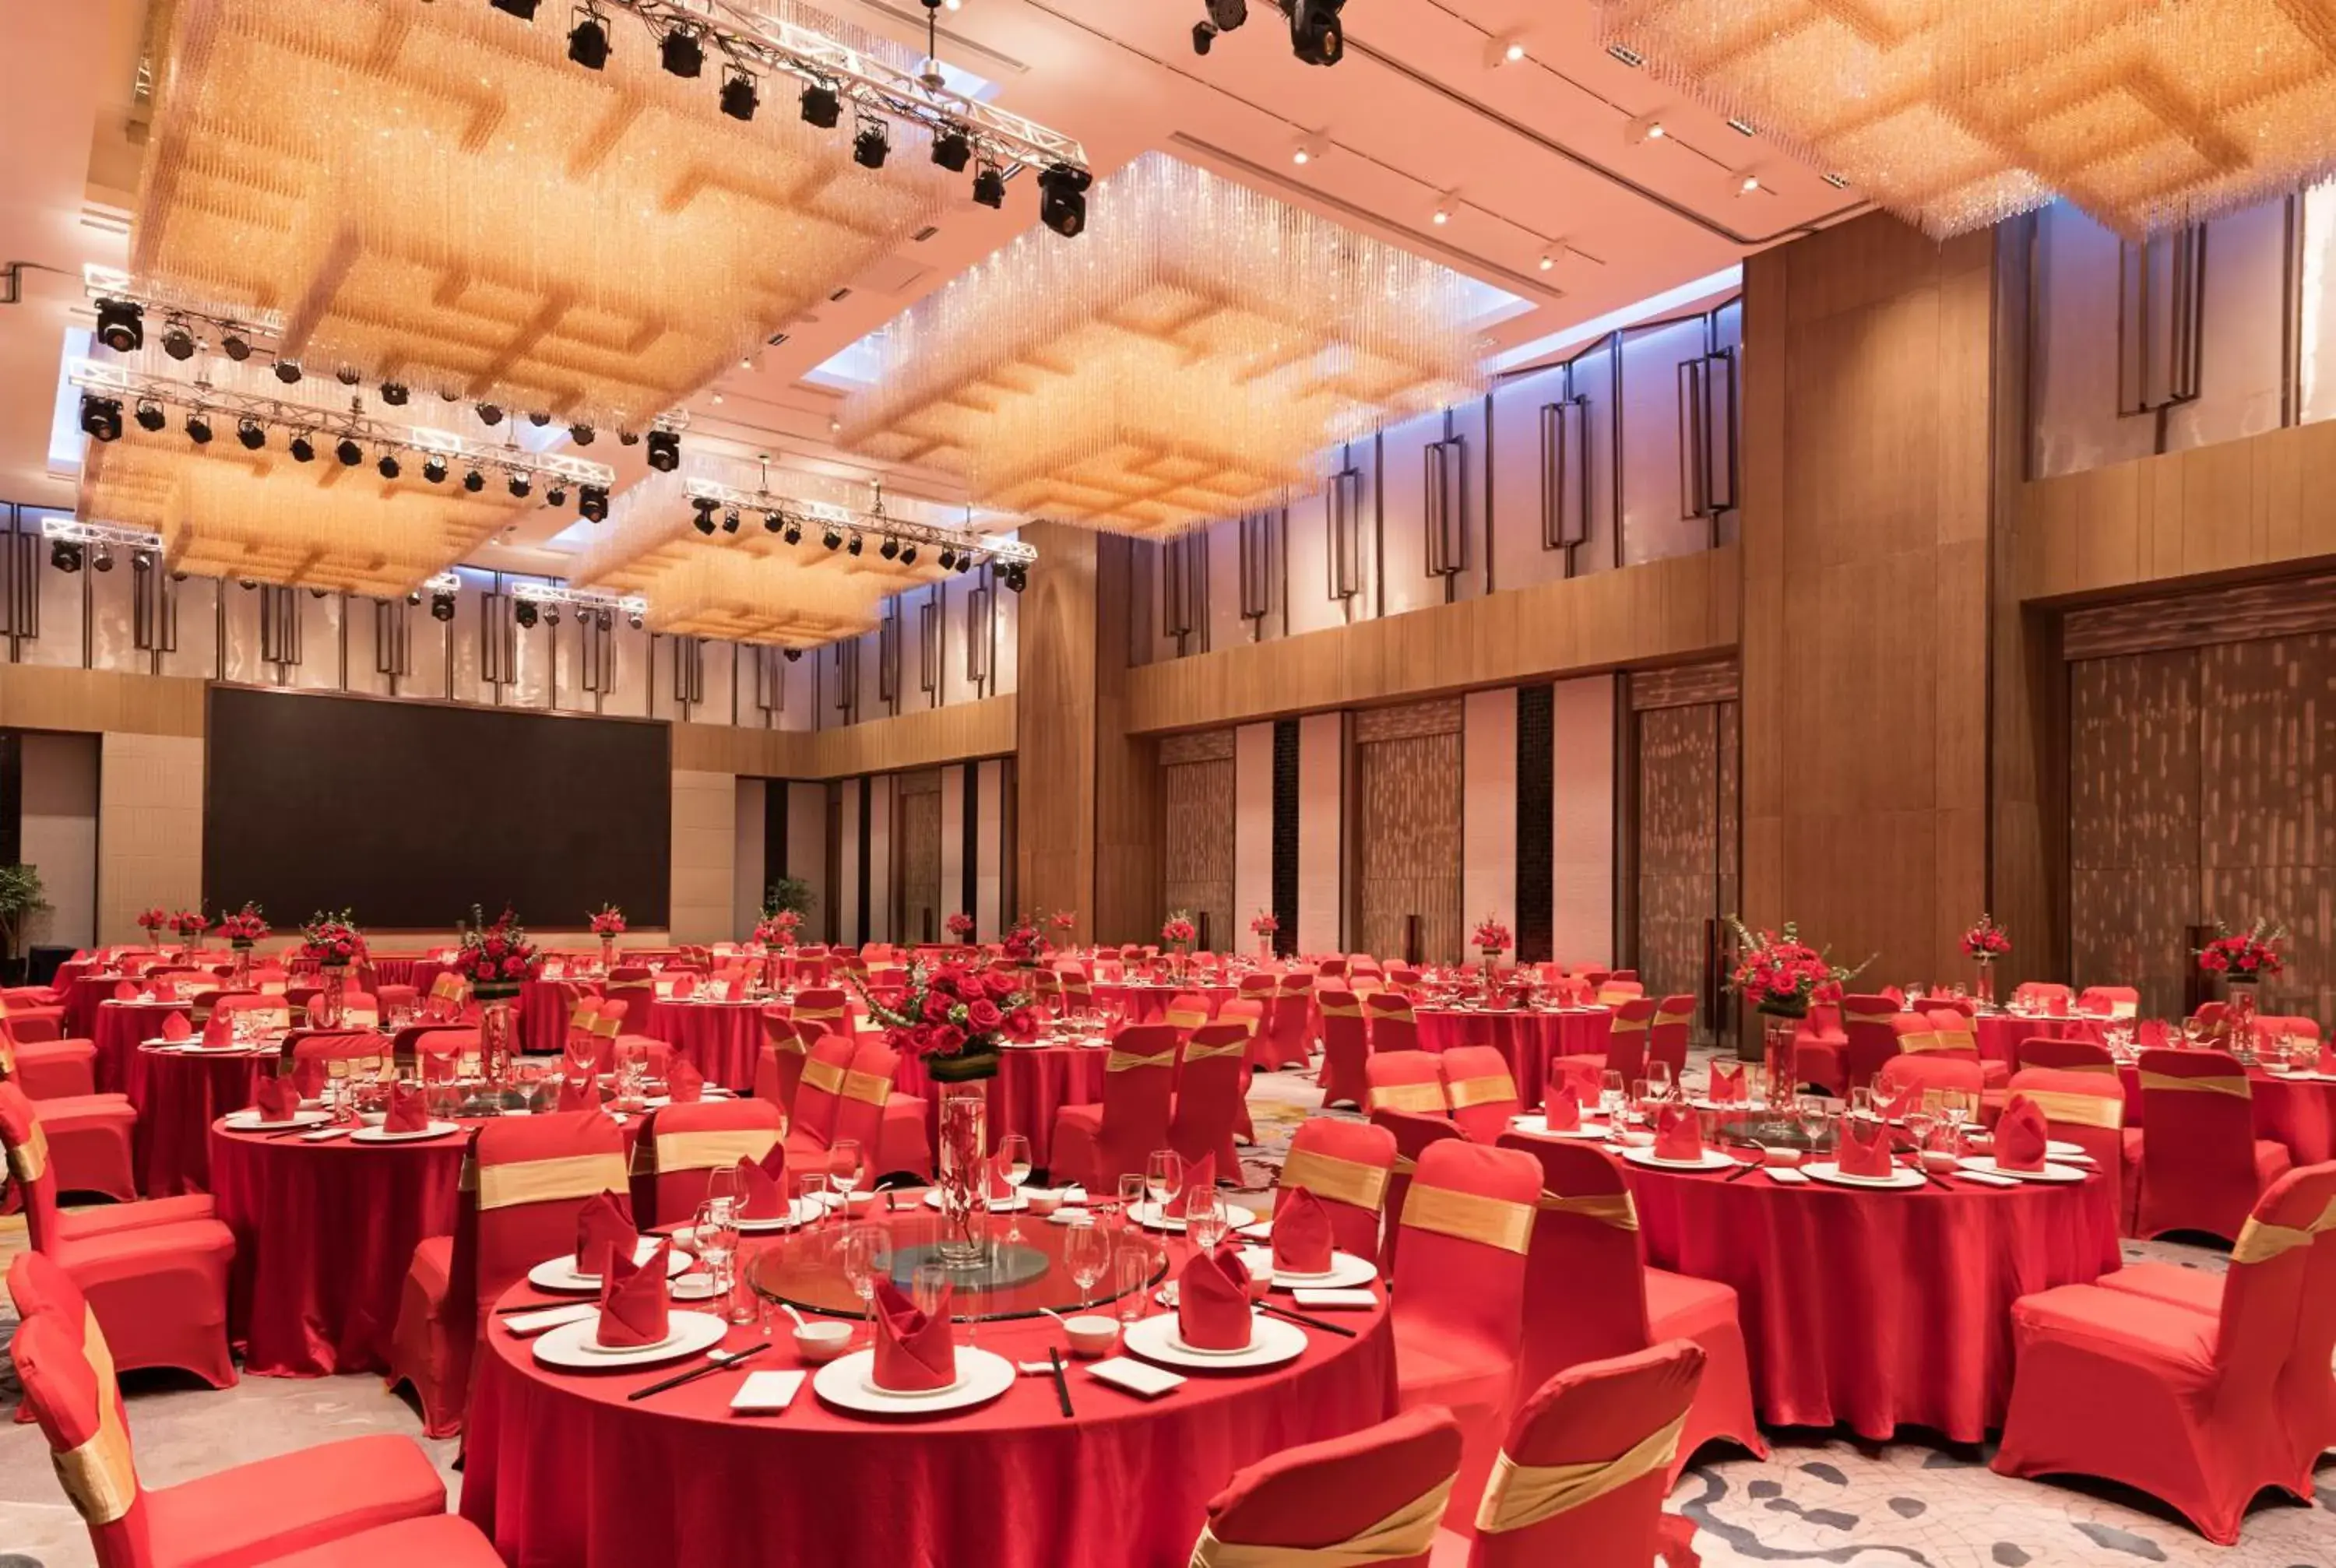 Banquet/Function facilities, Banquet Facilities in Hualuxe Wuhu